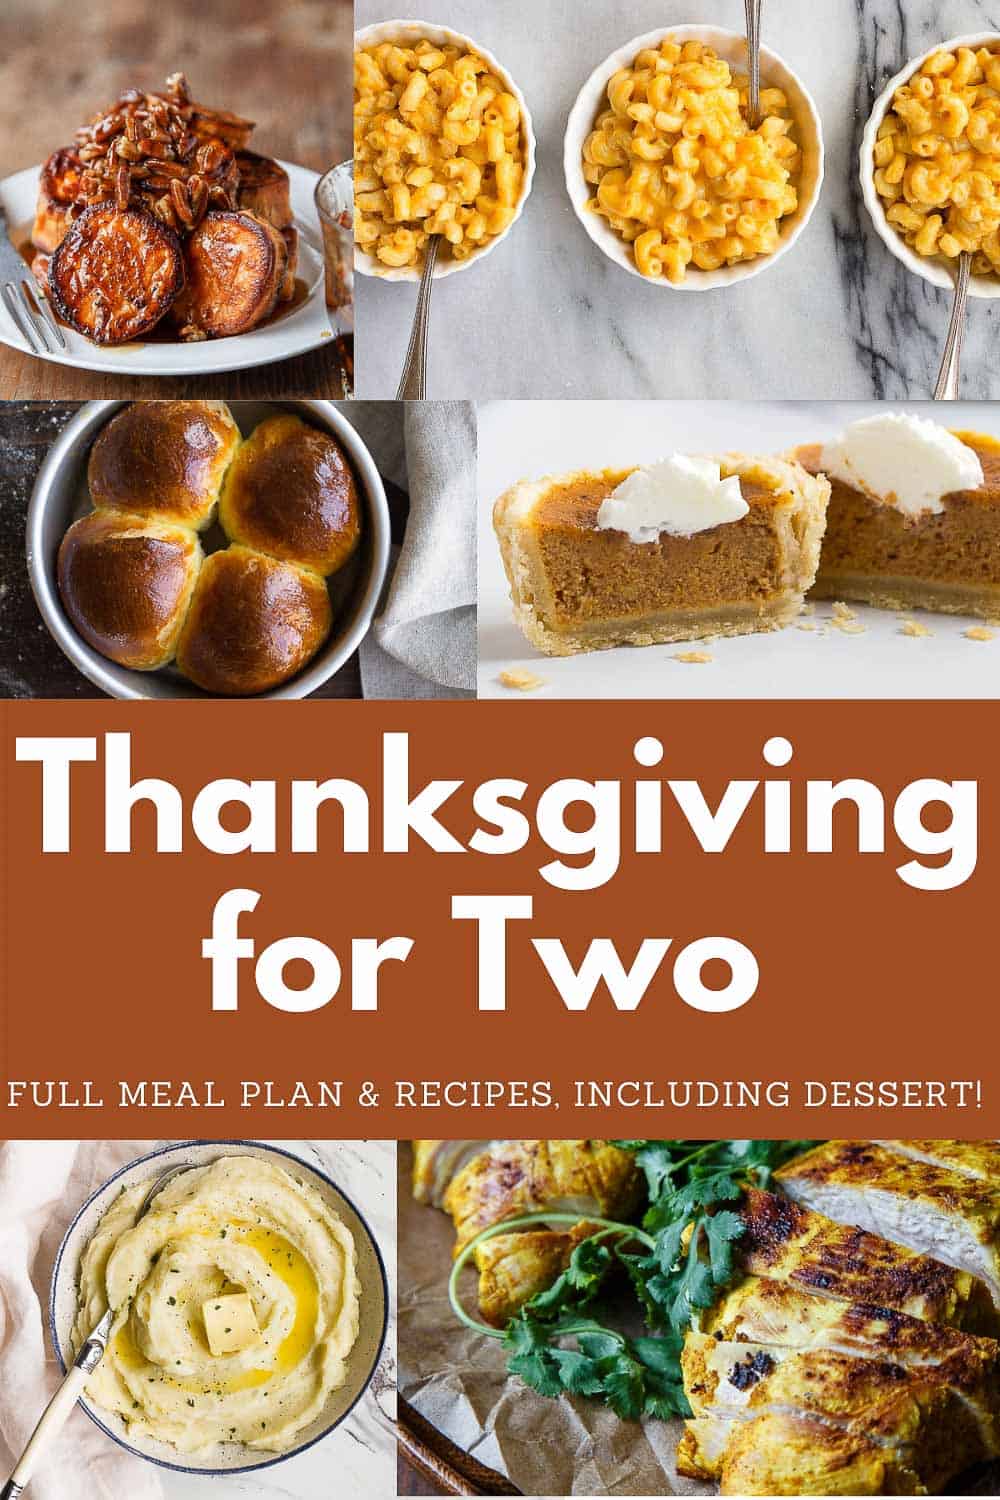 35 Awesome Thanksgiving Dinner Ideas!